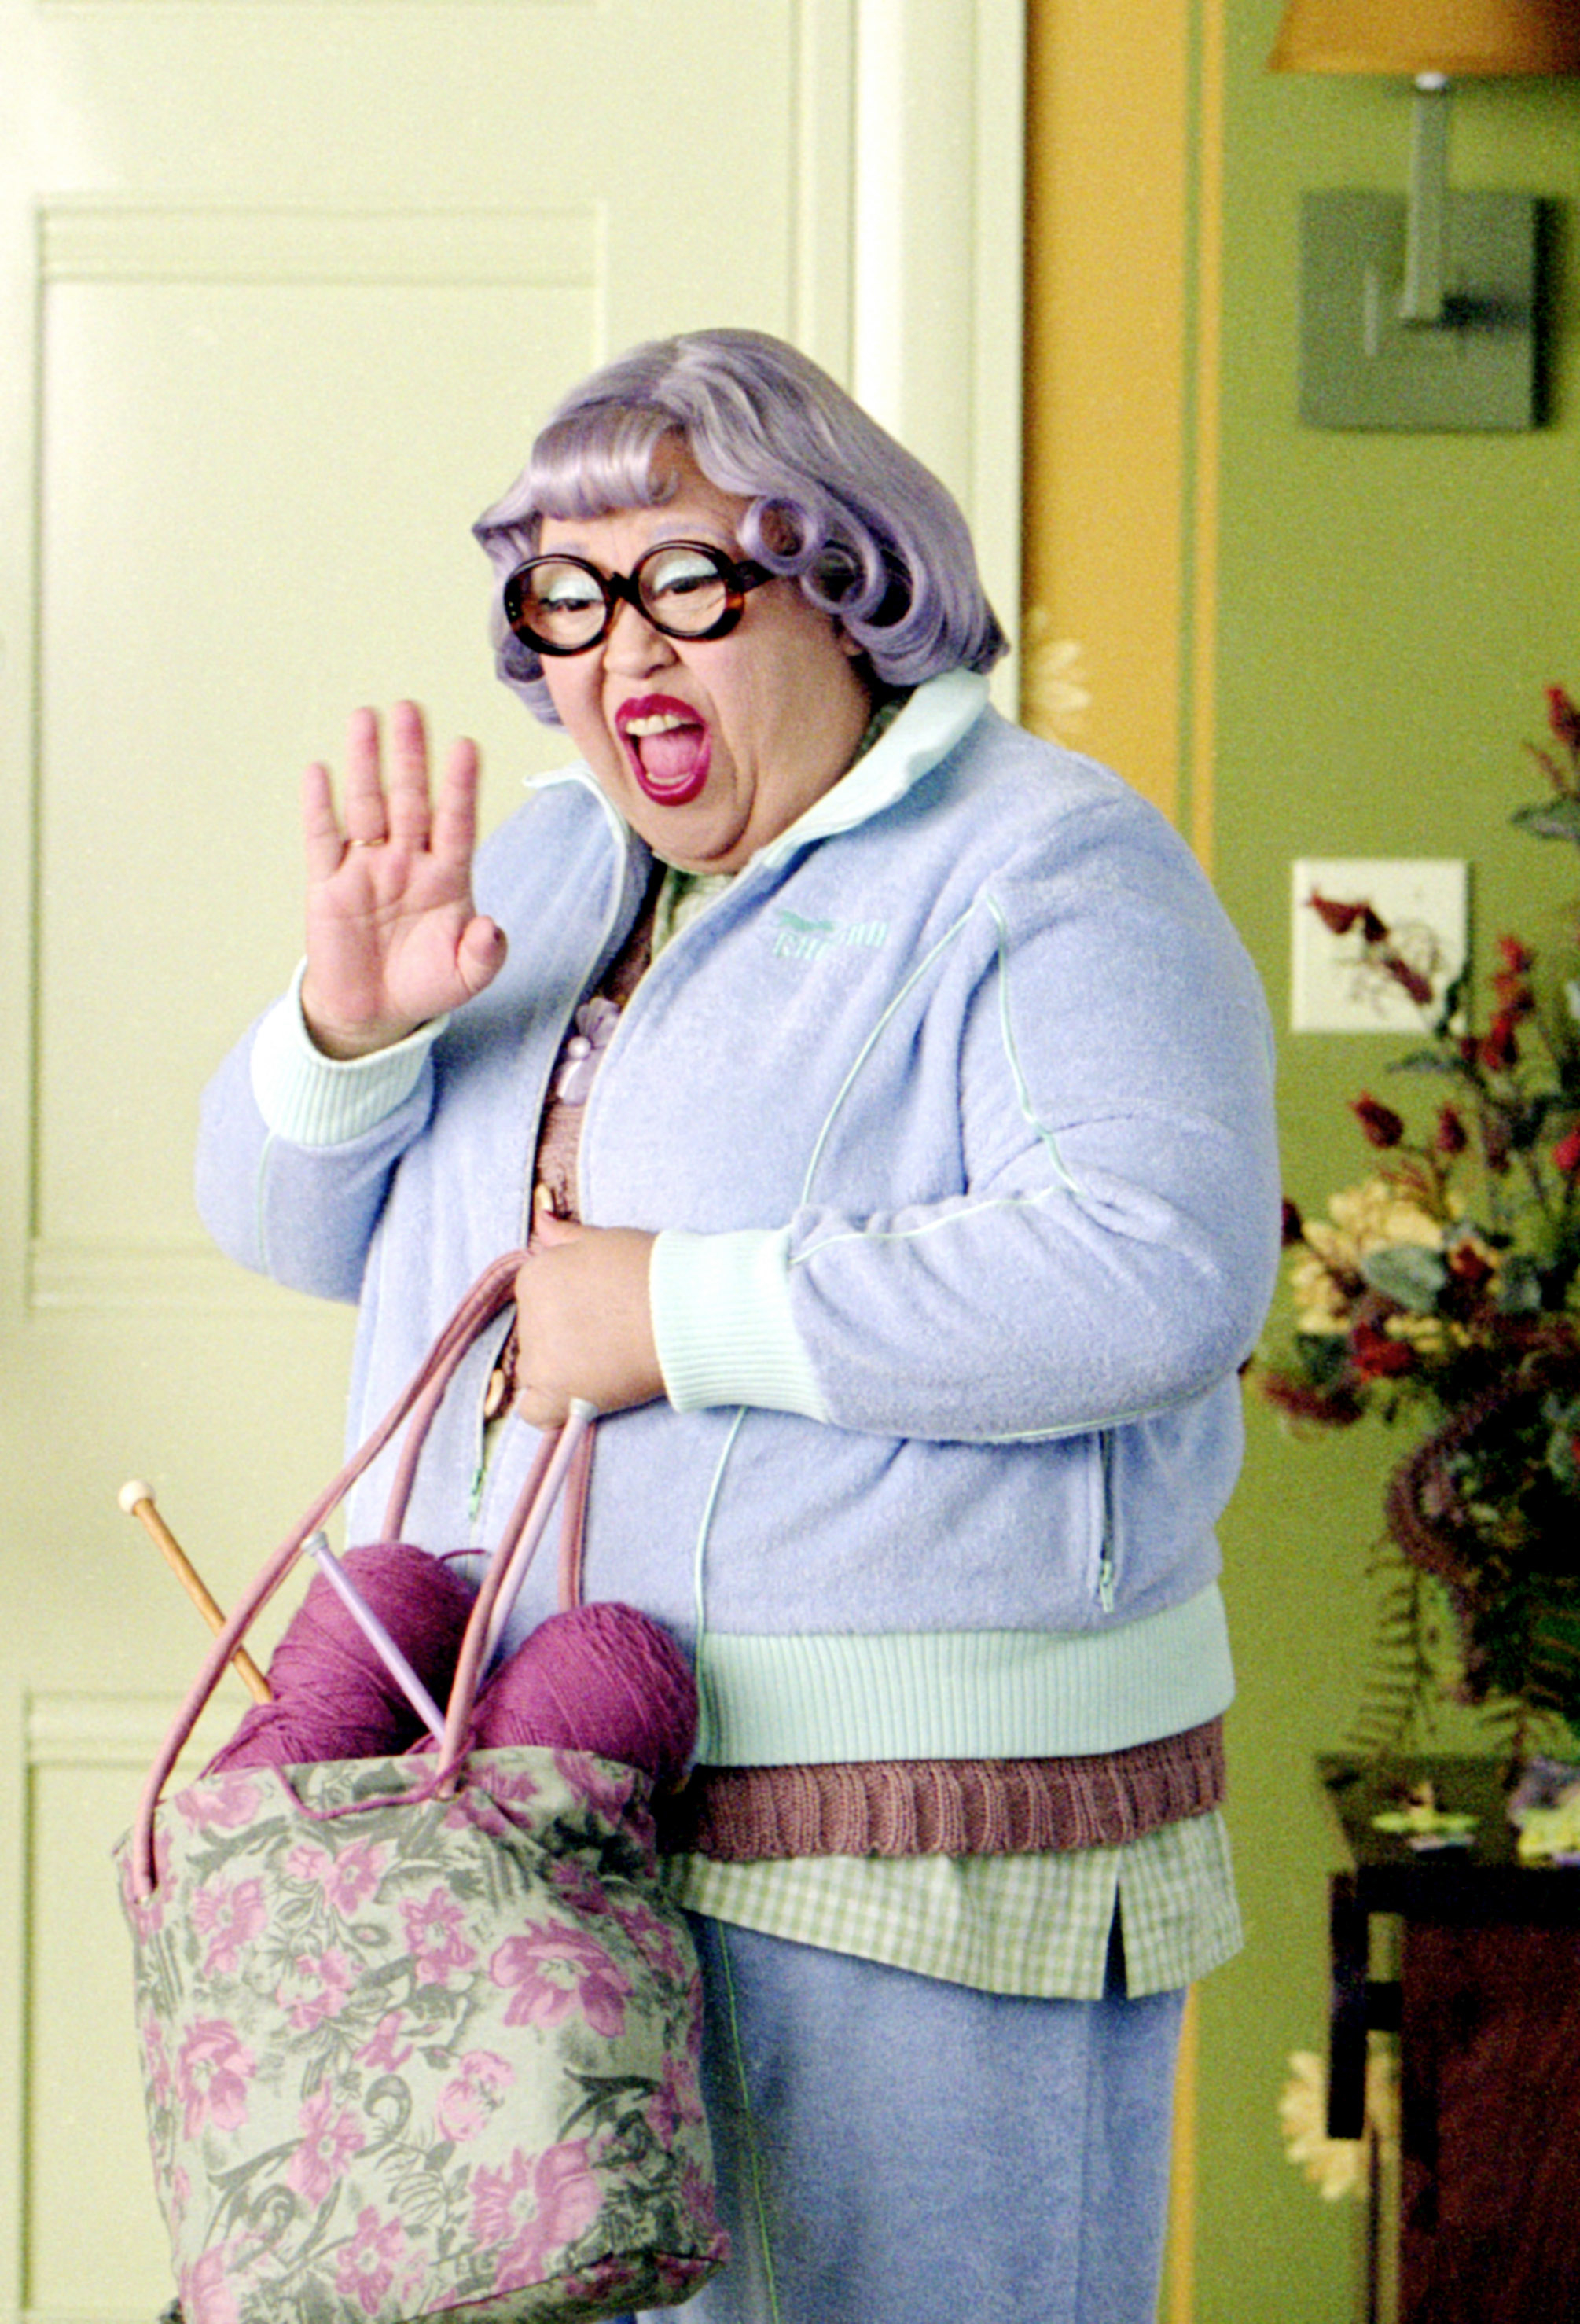 in a scene, Amy in a sweater and stylized wig and waving with a bag and yarn